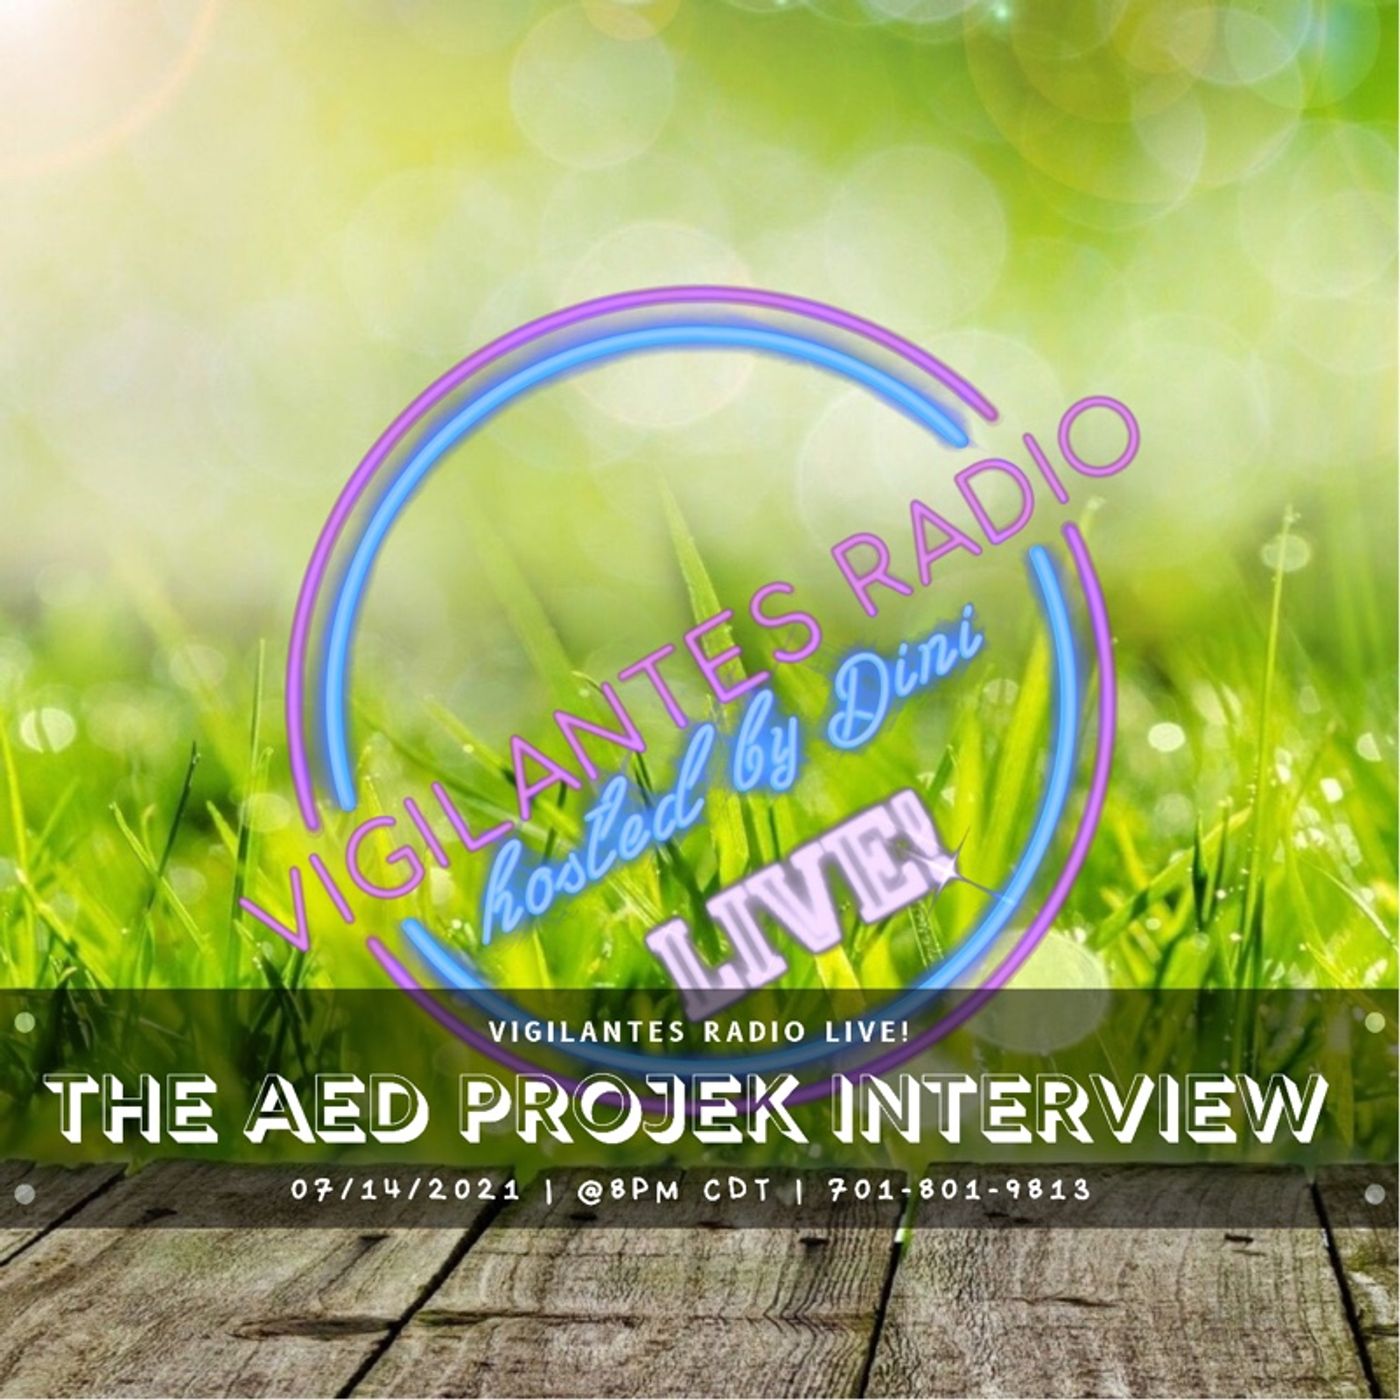 The AED Projek Interview. Image